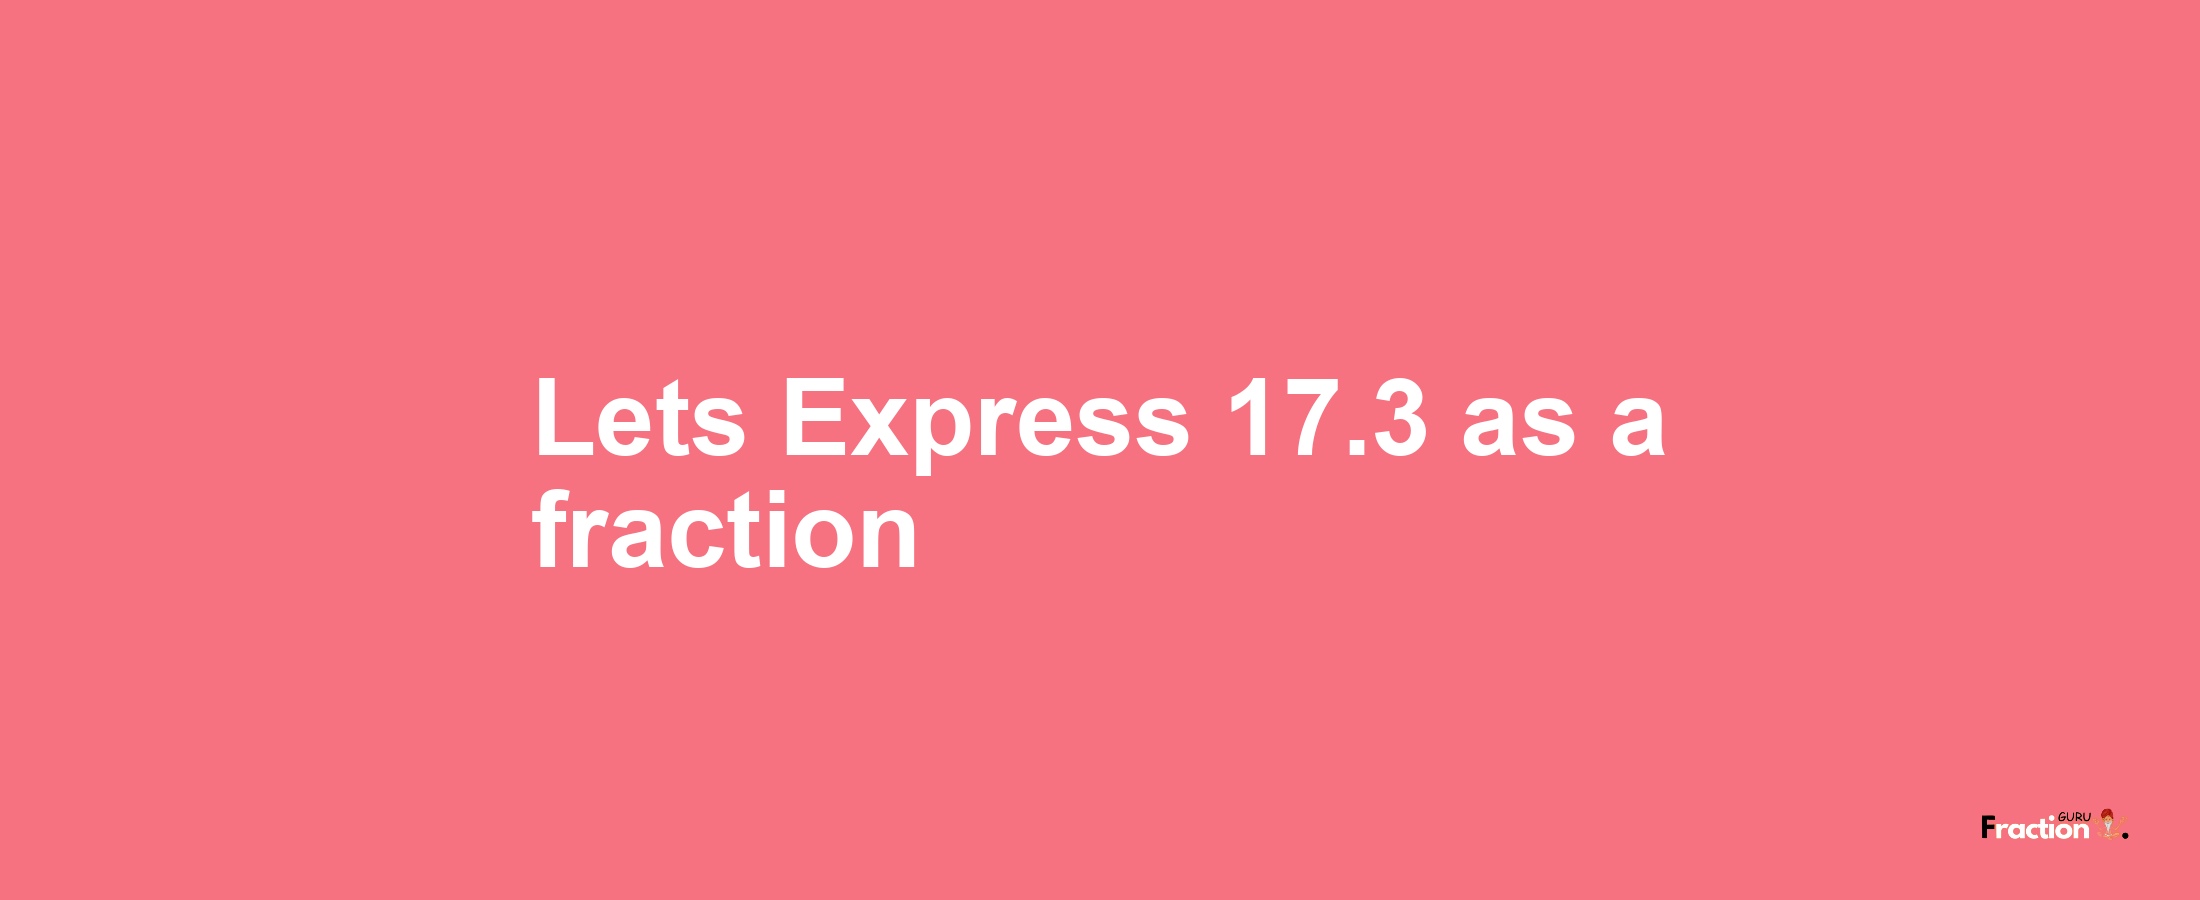 Lets Express 17.3 as afraction